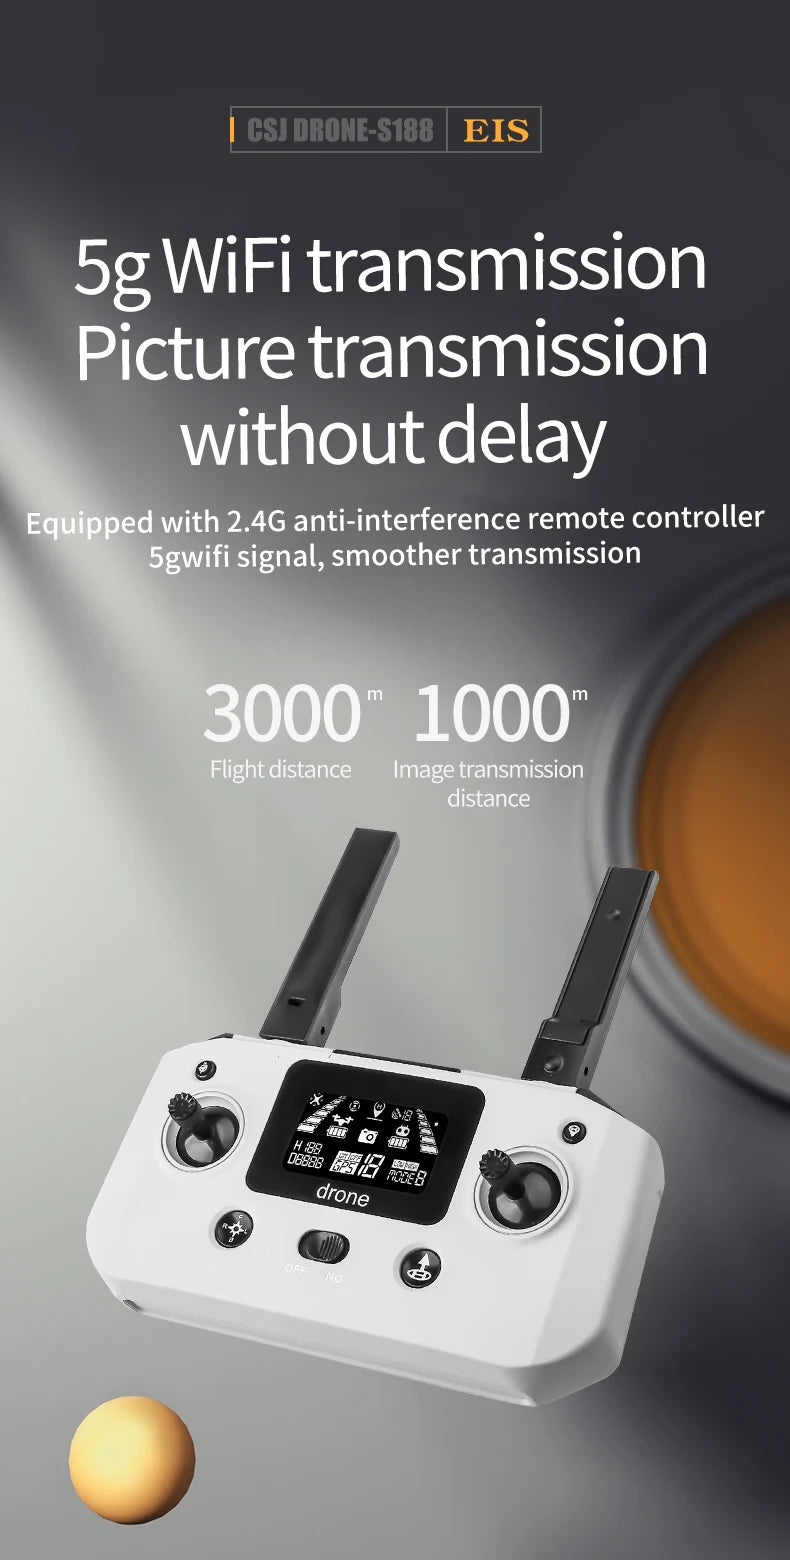 S188 Drone, CSJ DRONE-S188 EIS Sg WiFi transmission Picture transmission without delay